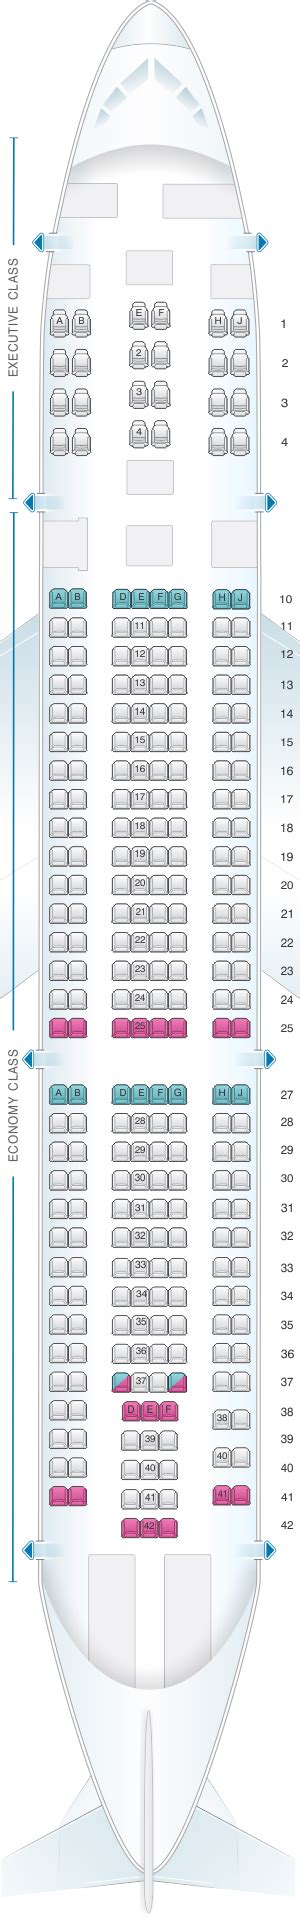 Seat Map Tap Portugal Airbus A Seatmaestro